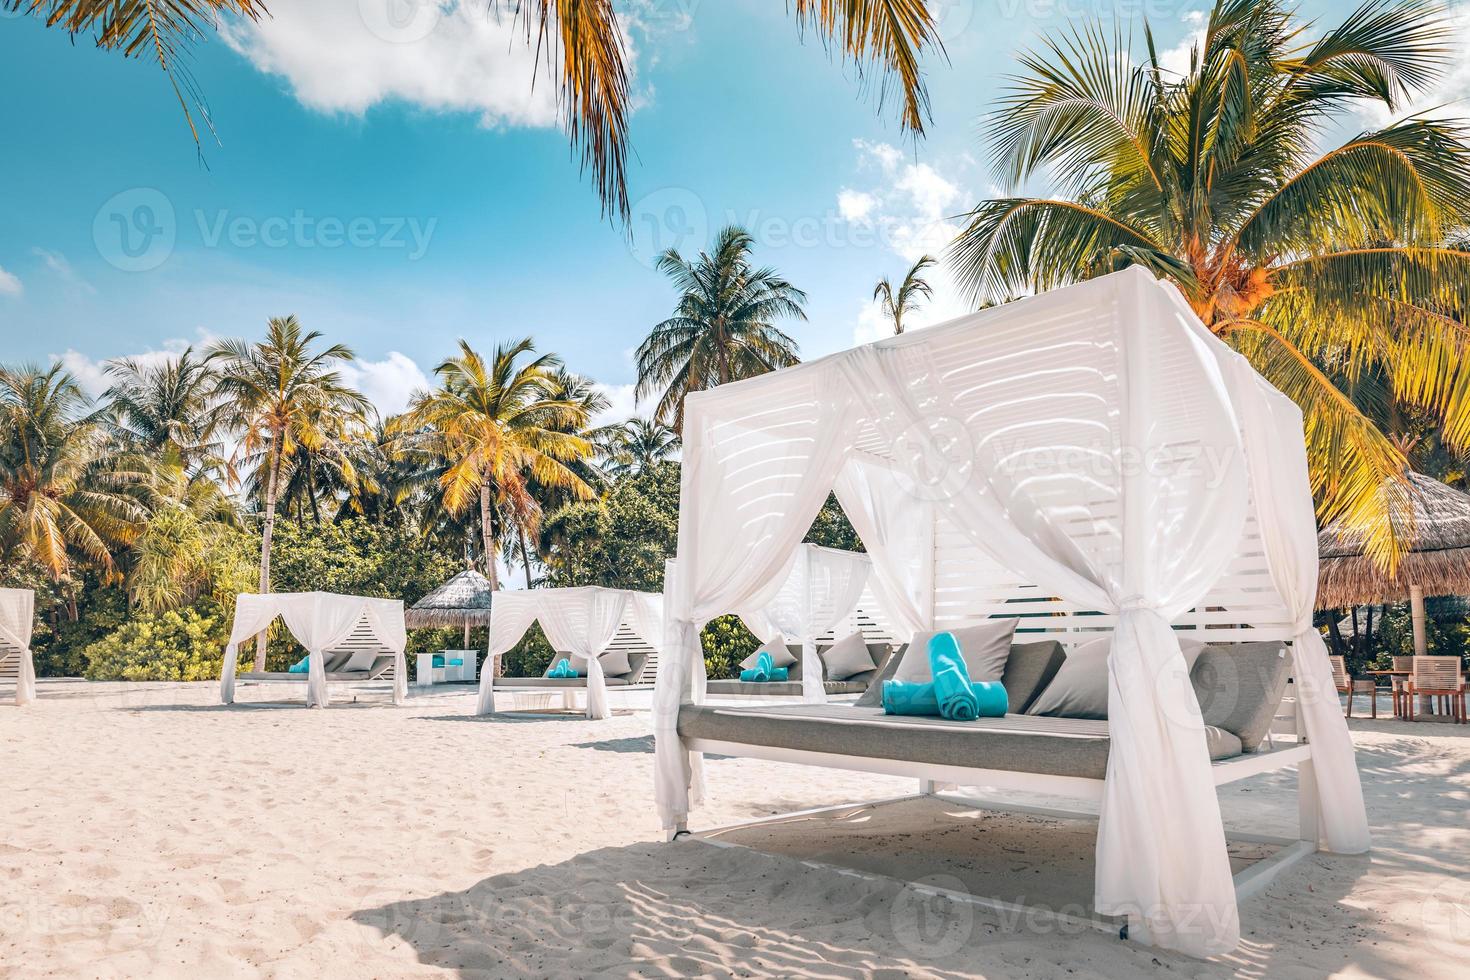 Amazing tropical beach scene with white canopy and curtain for luxury summer relaxation concept. Blue sky with white sand for sunny beach landscape background and summer vacation or holiday design photo